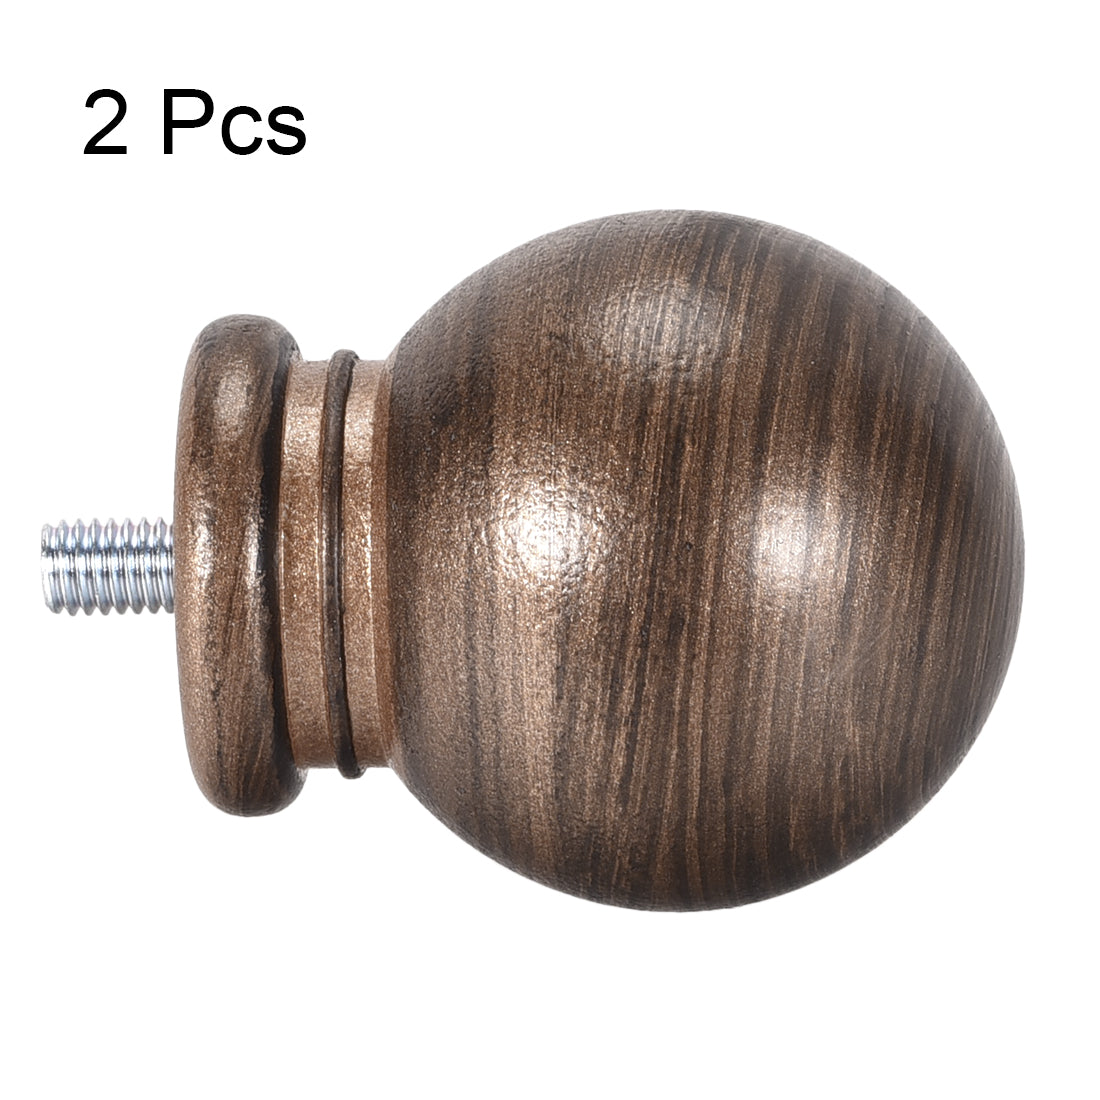 uxcell Uxcell Curtain Rod Finials Plastic End 49mm x 34mm Brown 2pcs